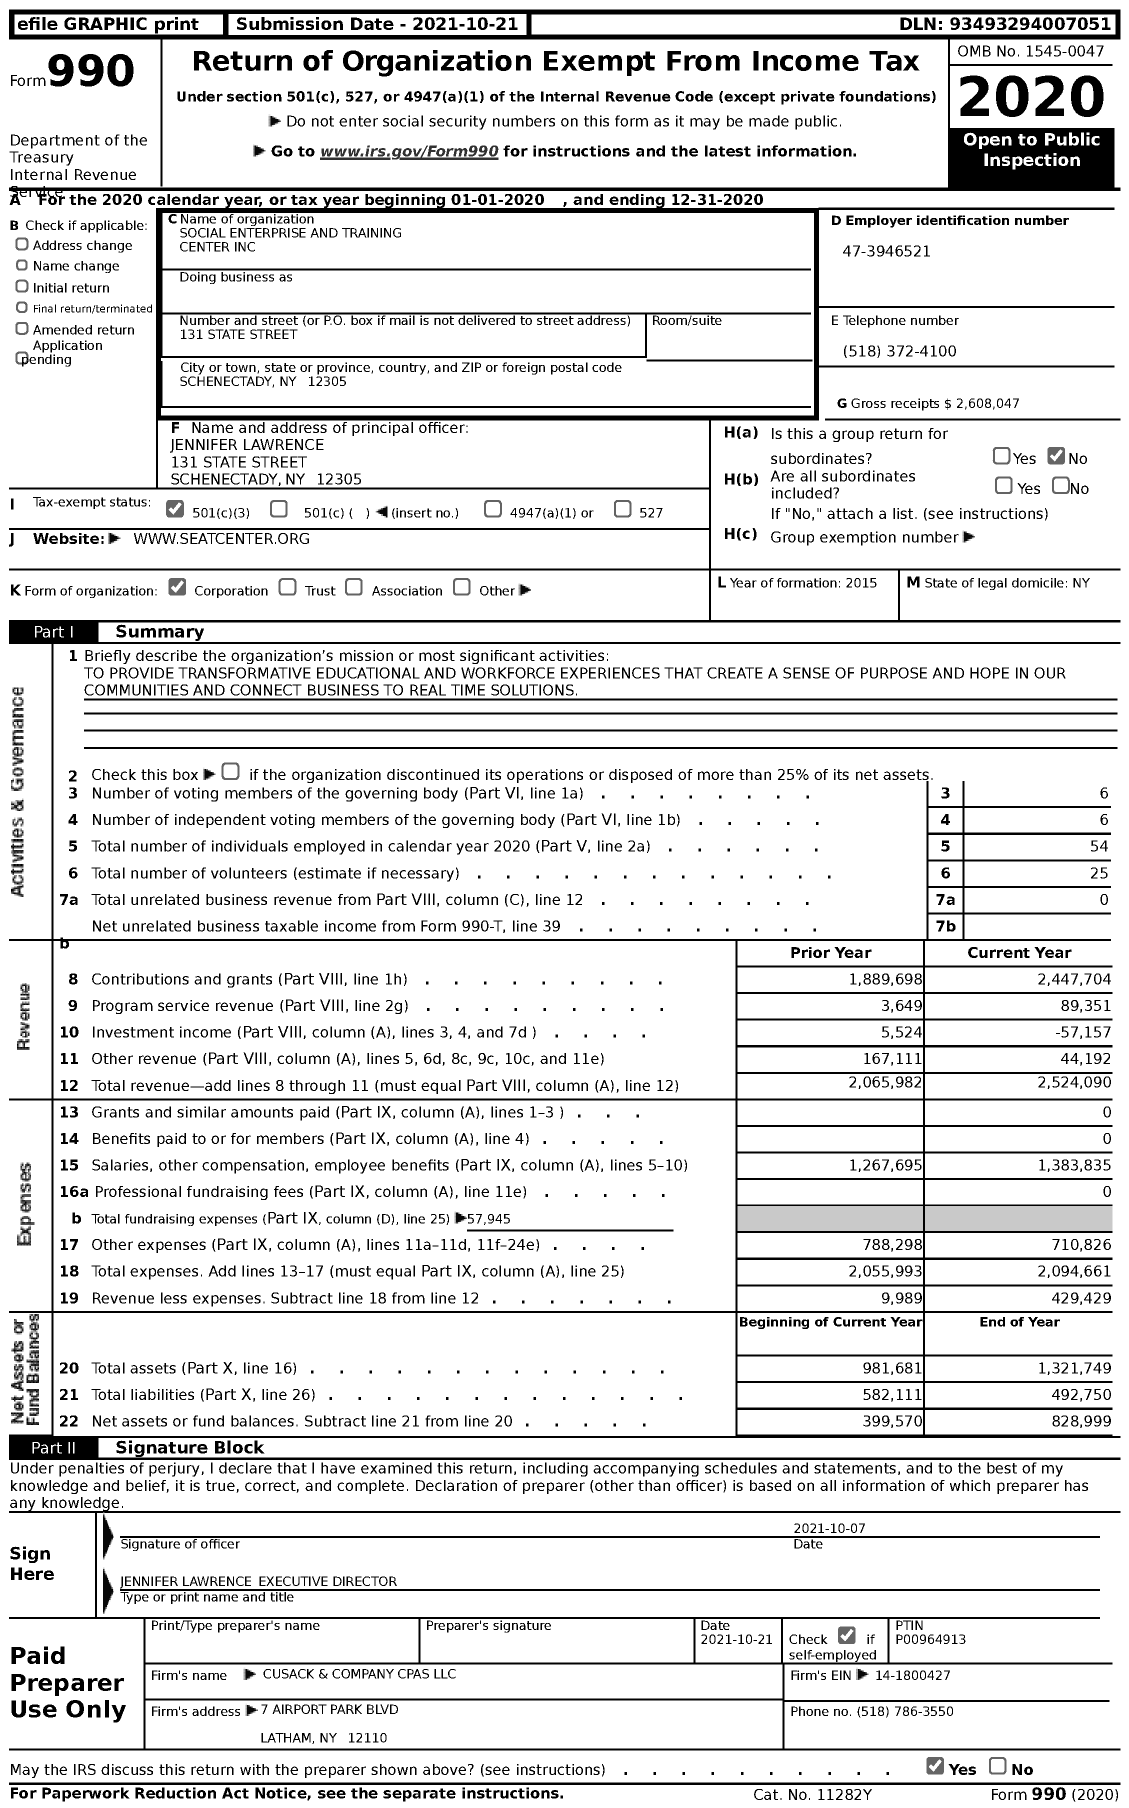 Image of first page of 2020 Form 990 for Social Enterprise and Training Center